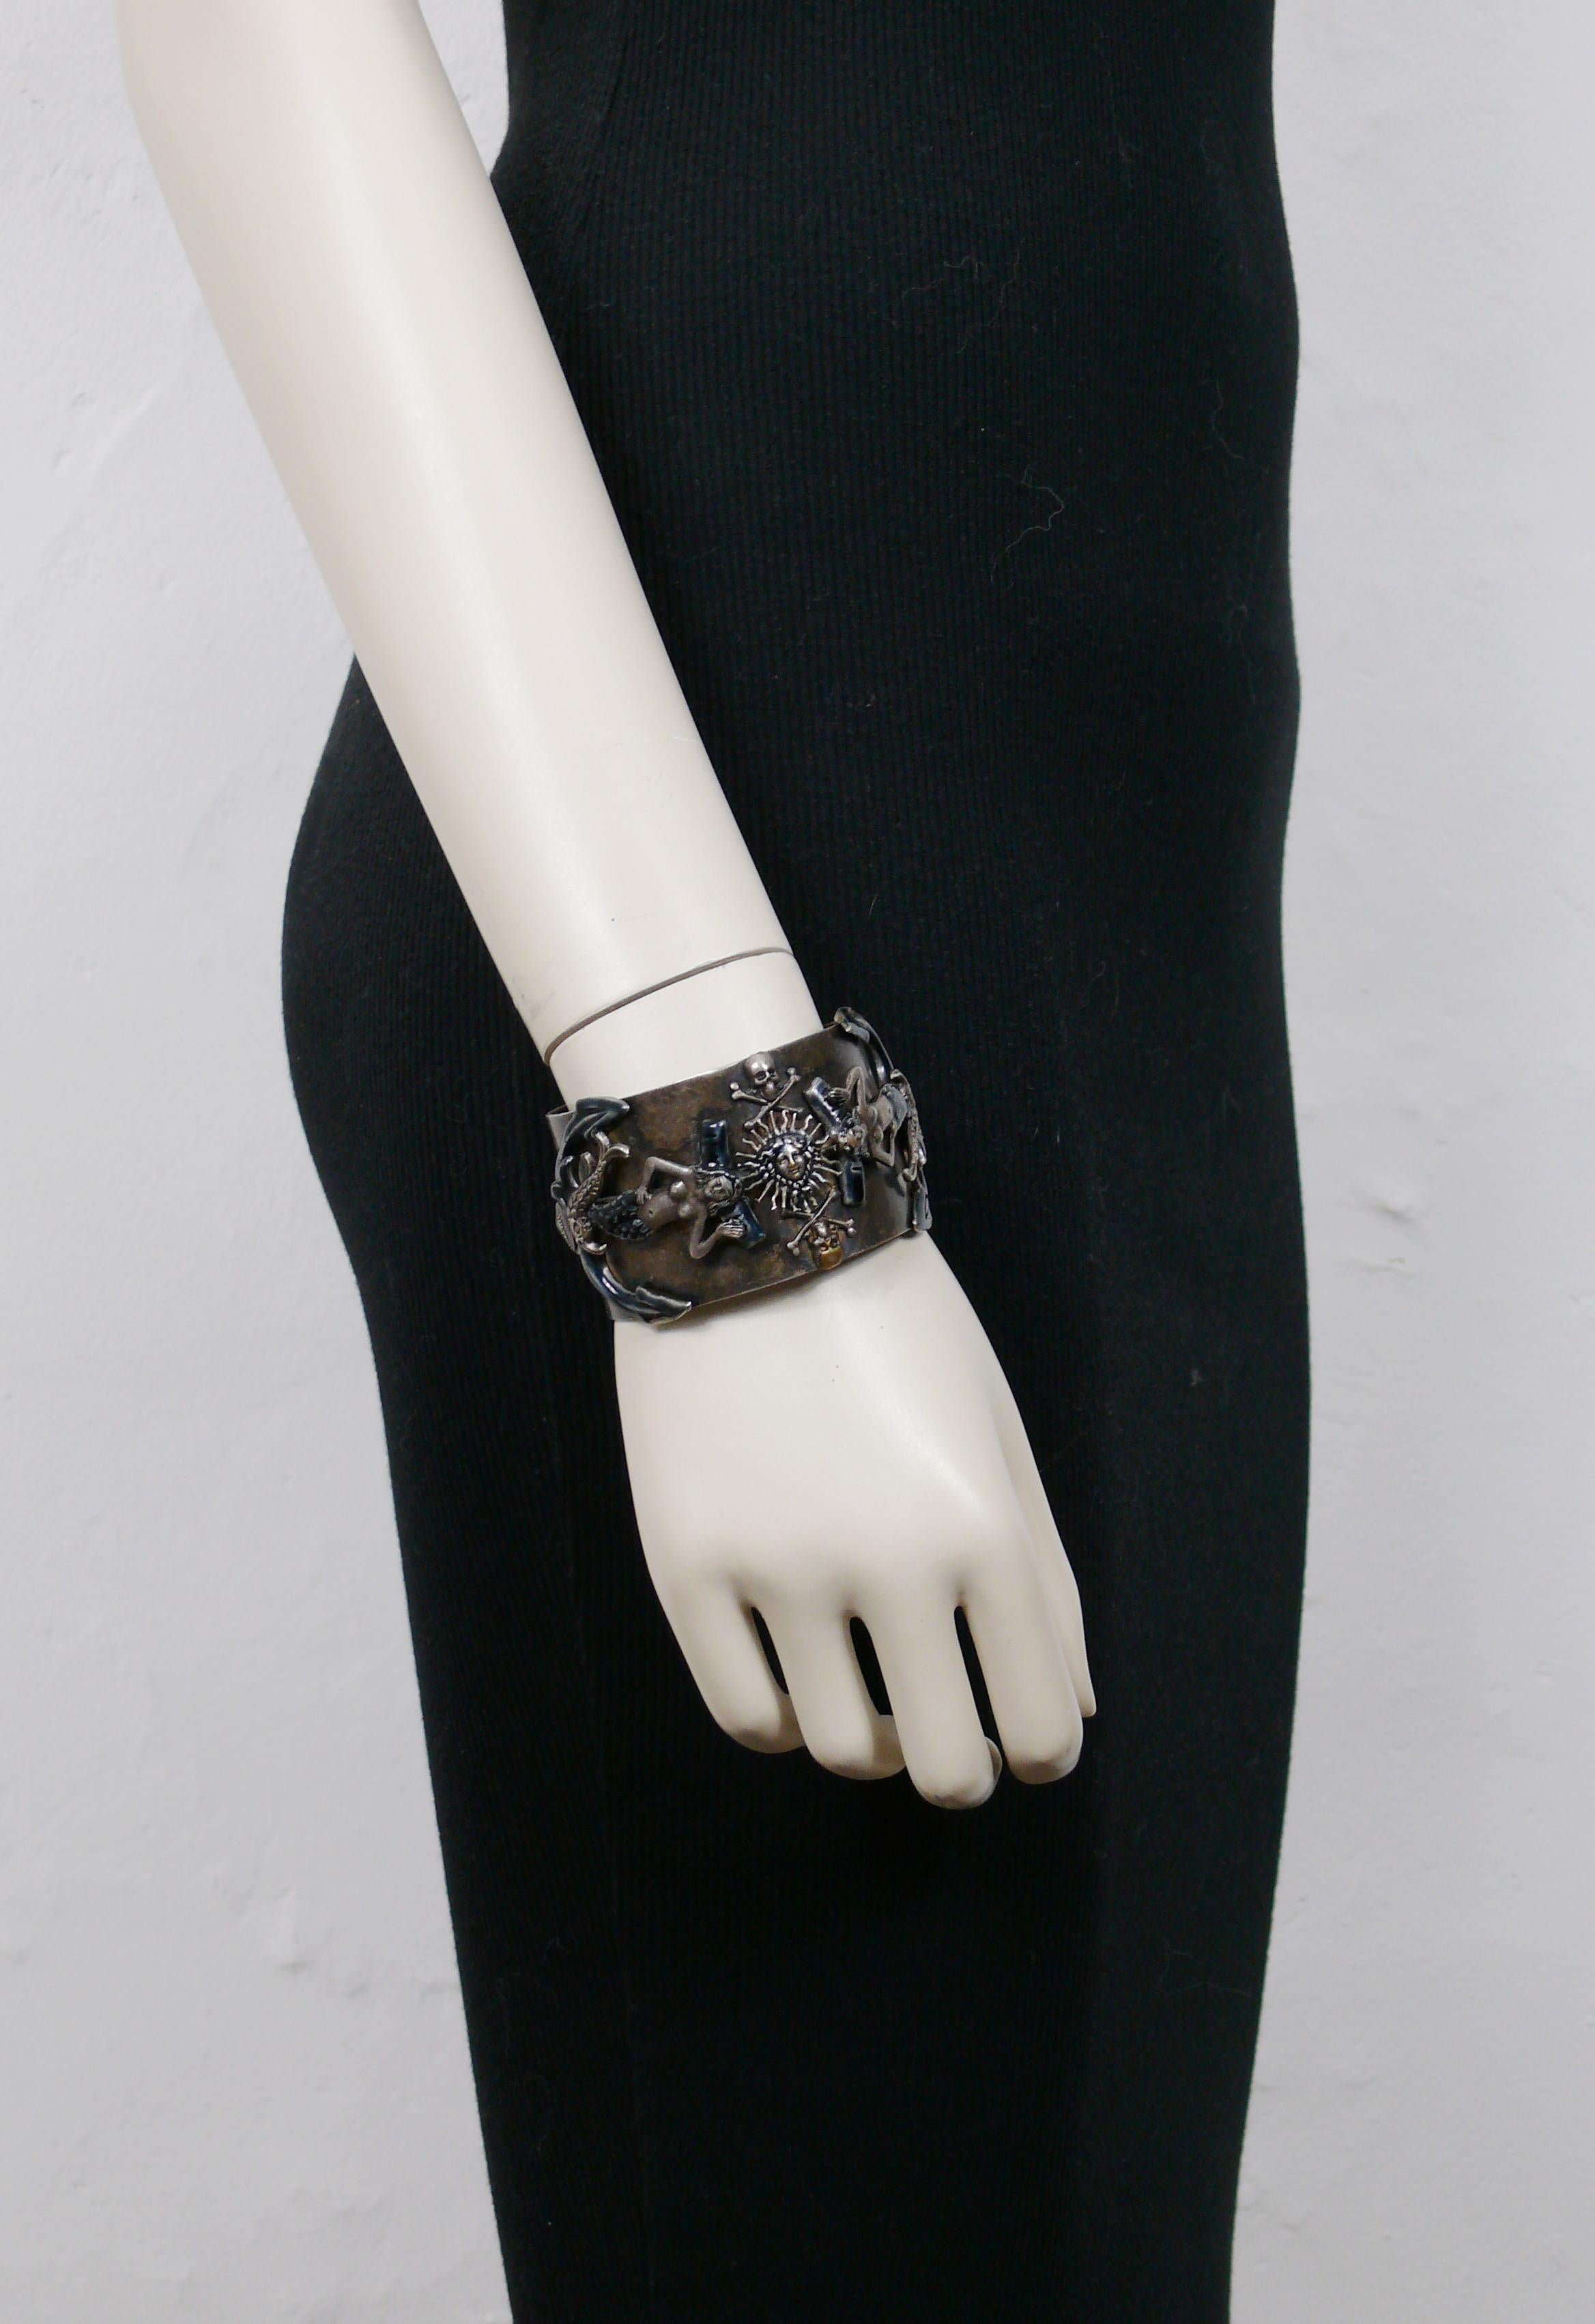 JEAN PAUL GAULTIER vintage dark oxidised metal cuff bracelet featuring mermaids and anchors embellished with blue enamel, dolphins, memento mori and radiant sun face.

The dark oxidised patina is from original manufacturing.

Marked